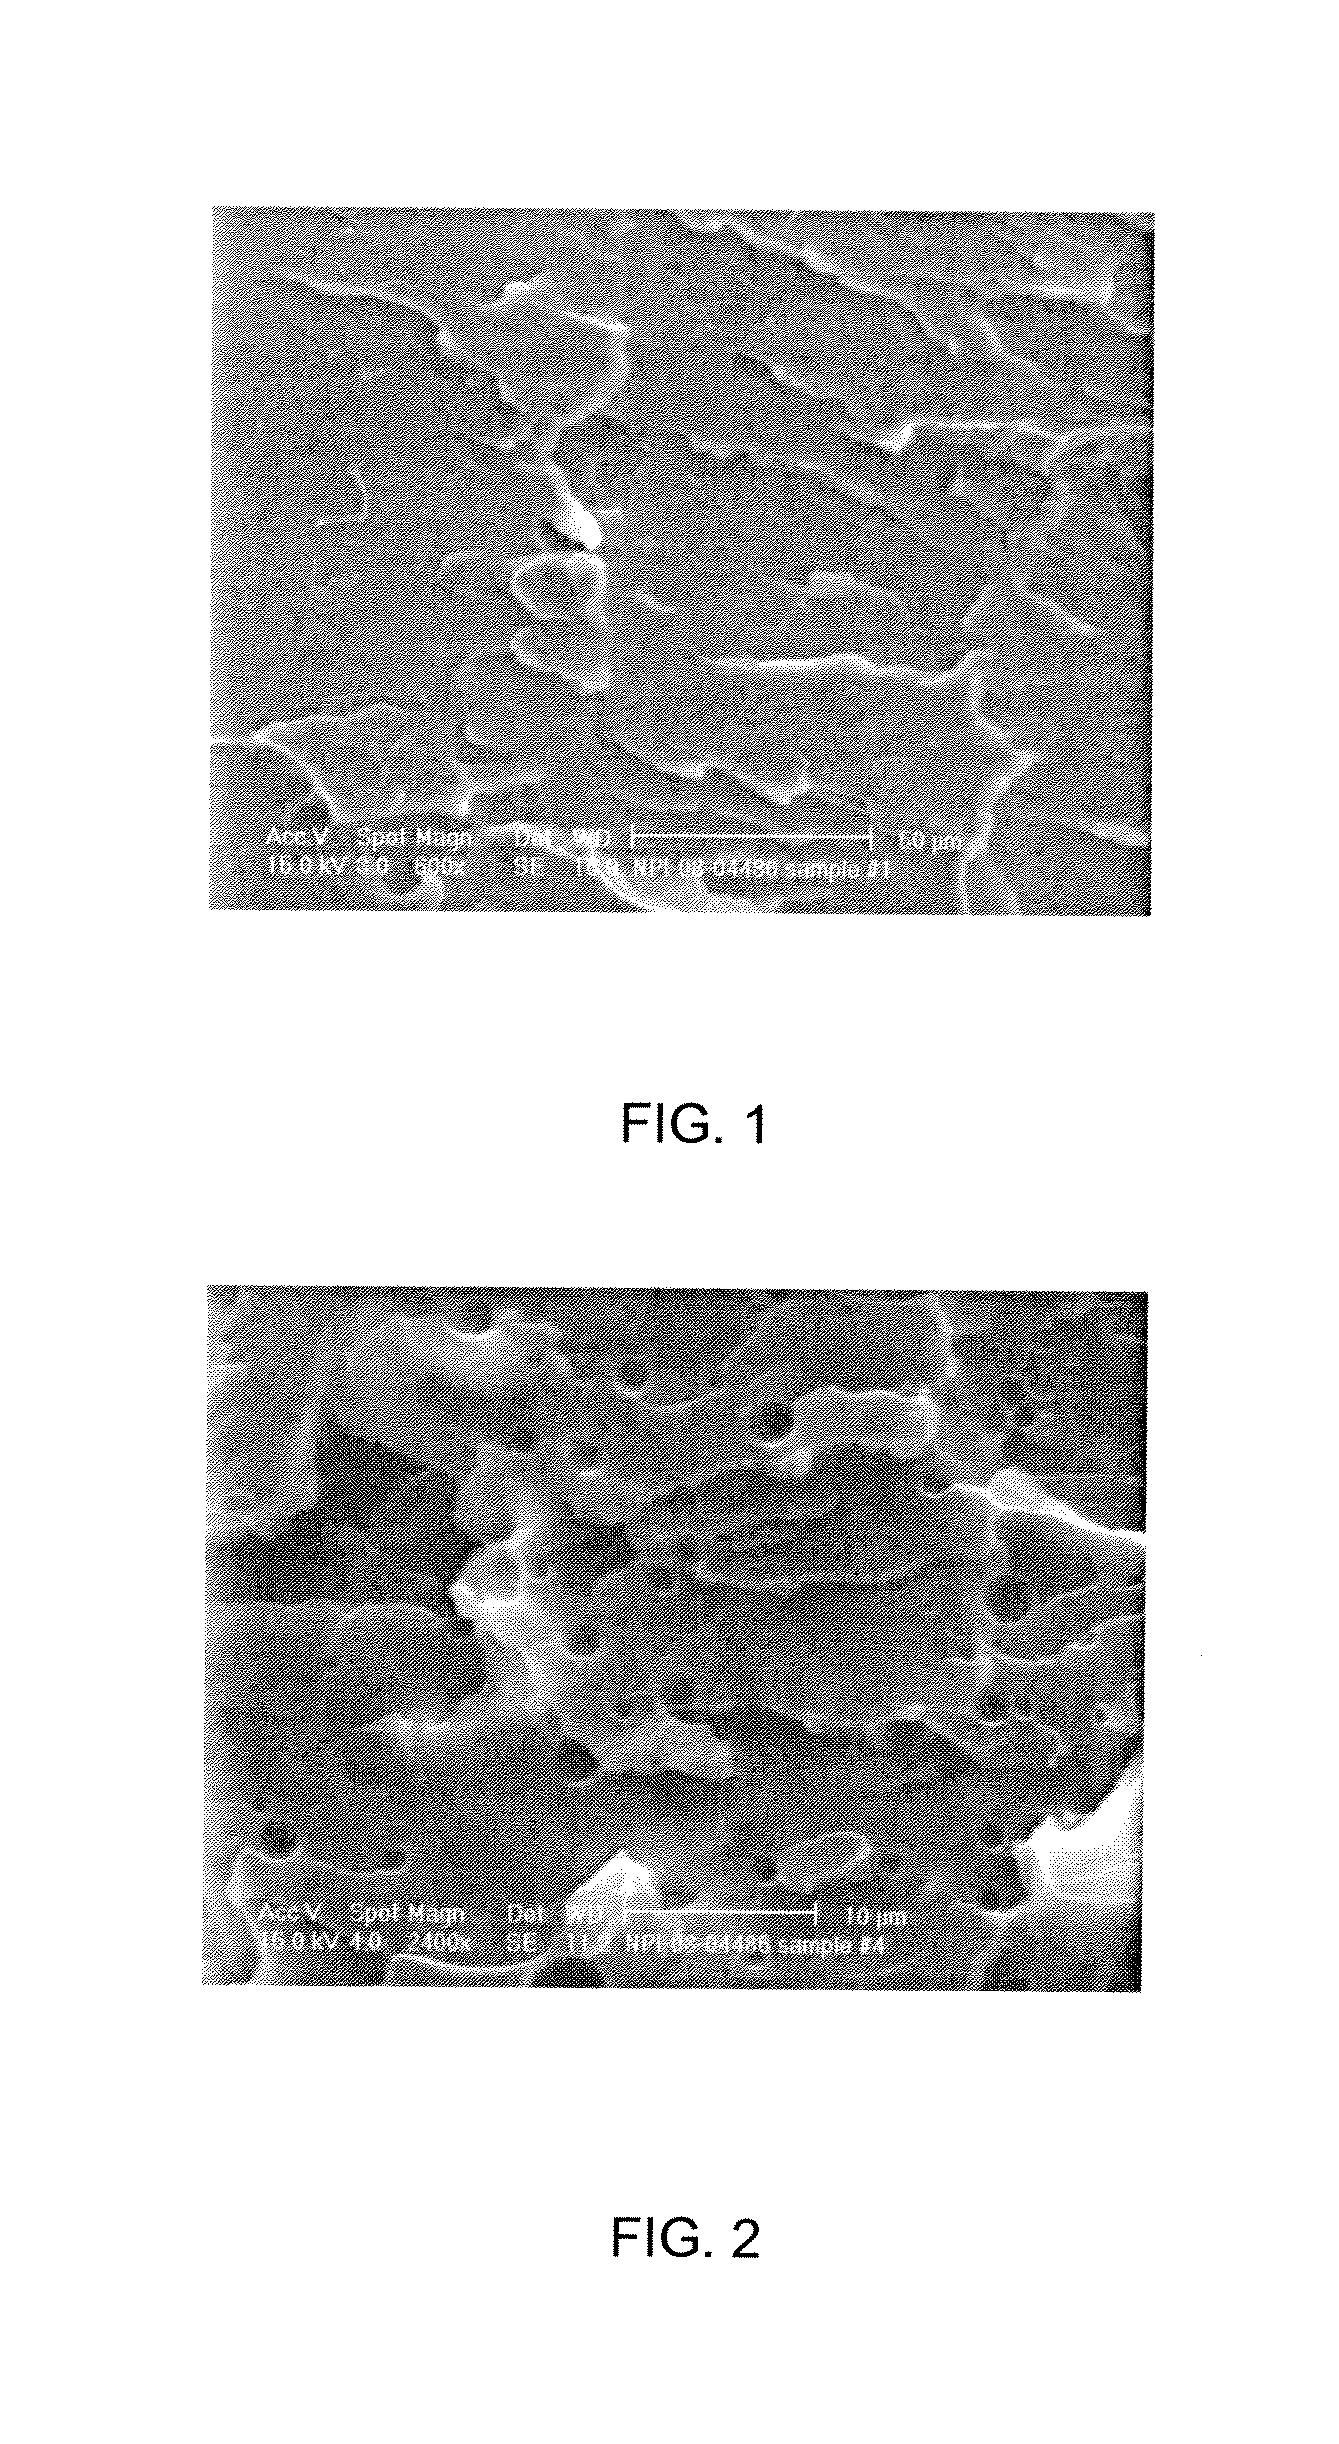 Polycarbonate composition with improved impact strength